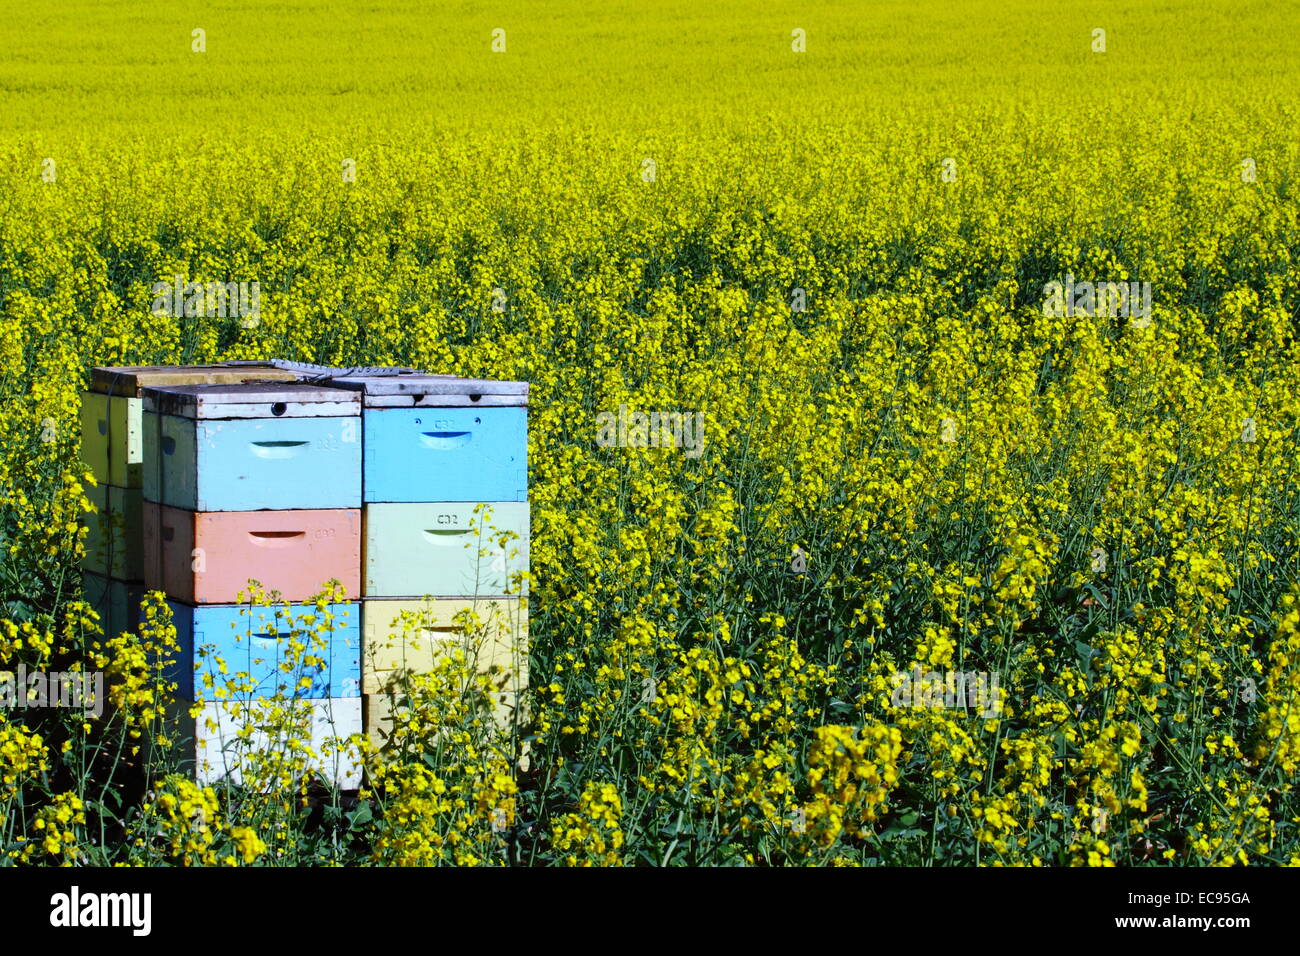 Bee boxes among a field of canola near New Norcia, Western Australia. Stock Photo